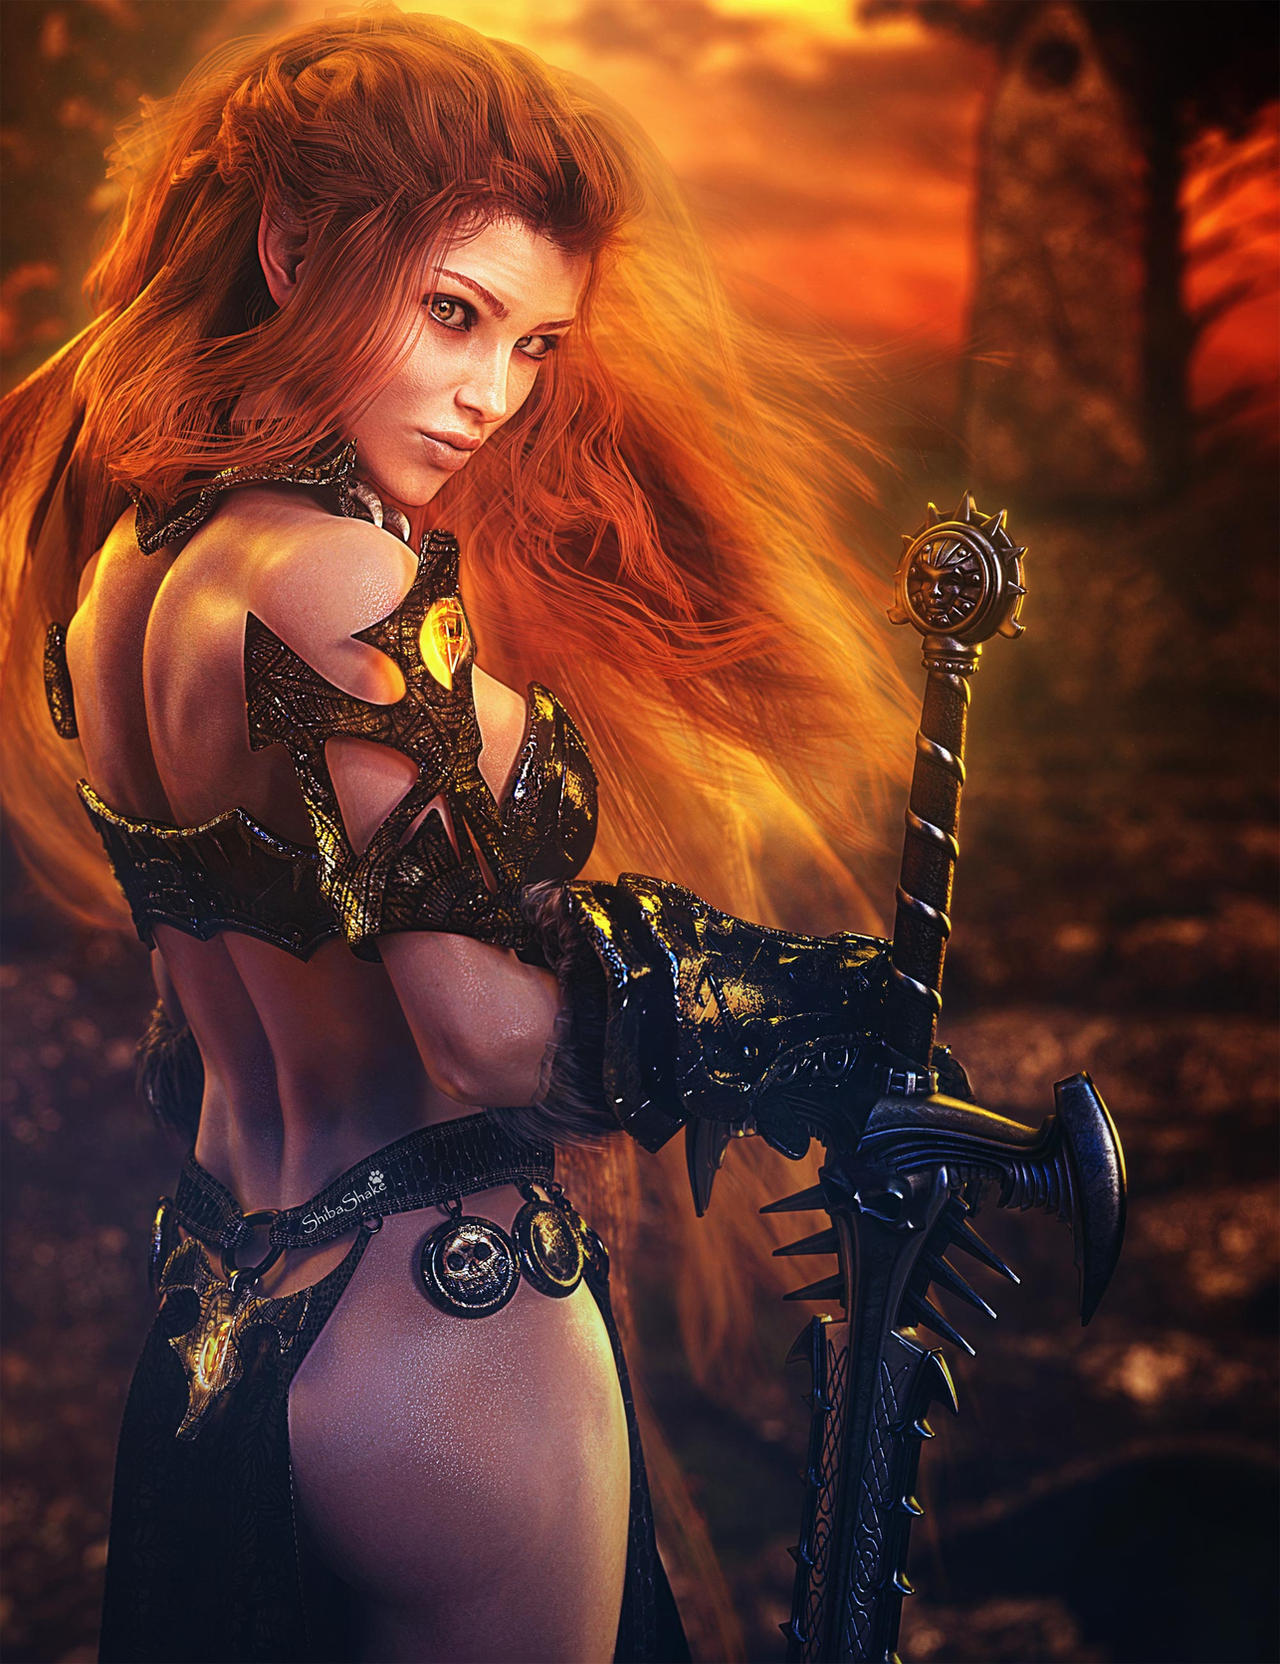 Red haired fierce warrior woman with large sword and armor. Fantasy woman art. Daz Studio Iray image. 